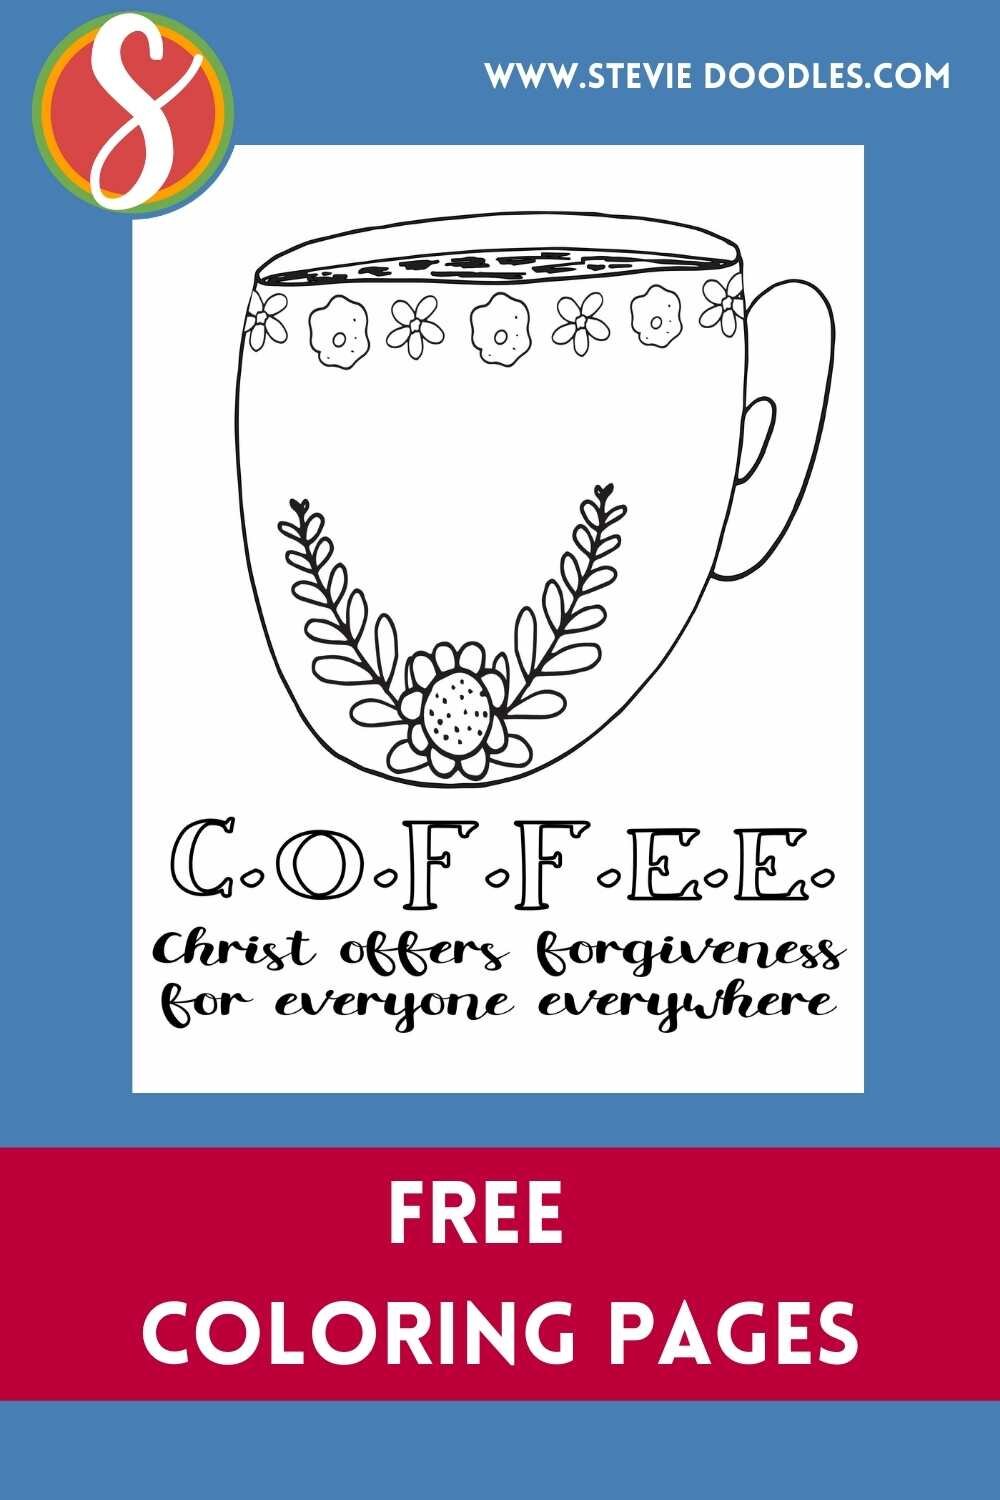 Free COFFEE Christian coloring page from Stevie Doodles